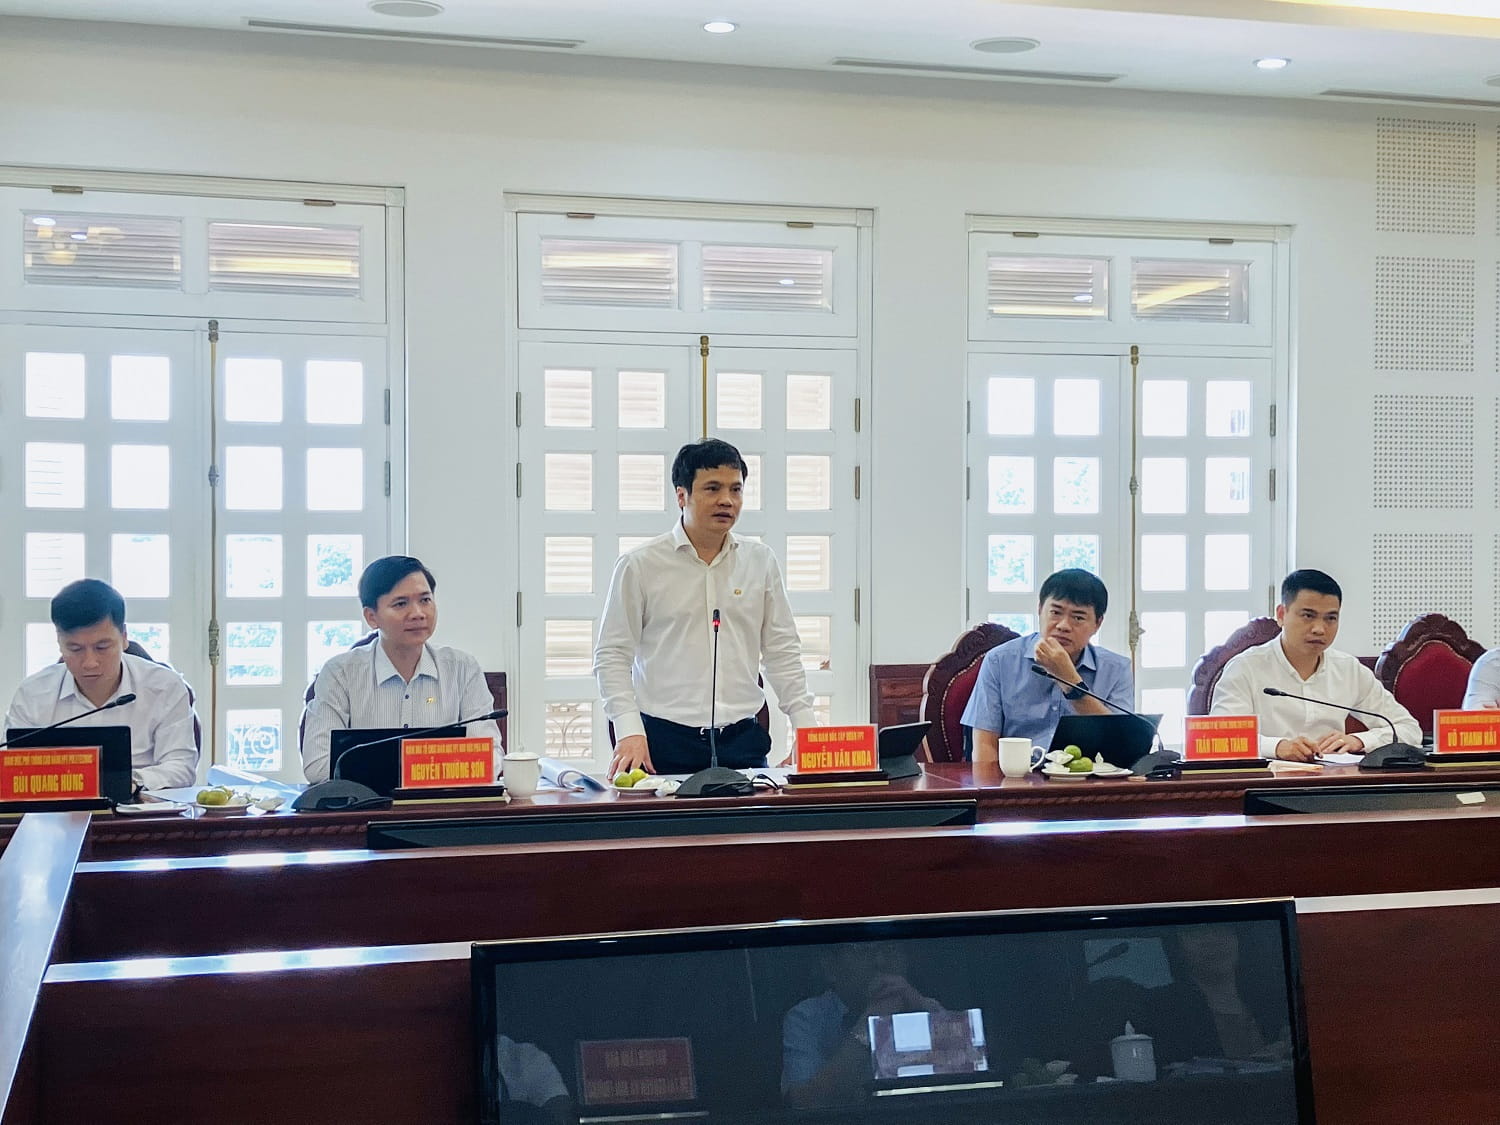 FPT CEO Nguyen Van Khoa shared his desire to help Gia Lai develop in two directions: education and digital transformation, to achieve breakthrough development